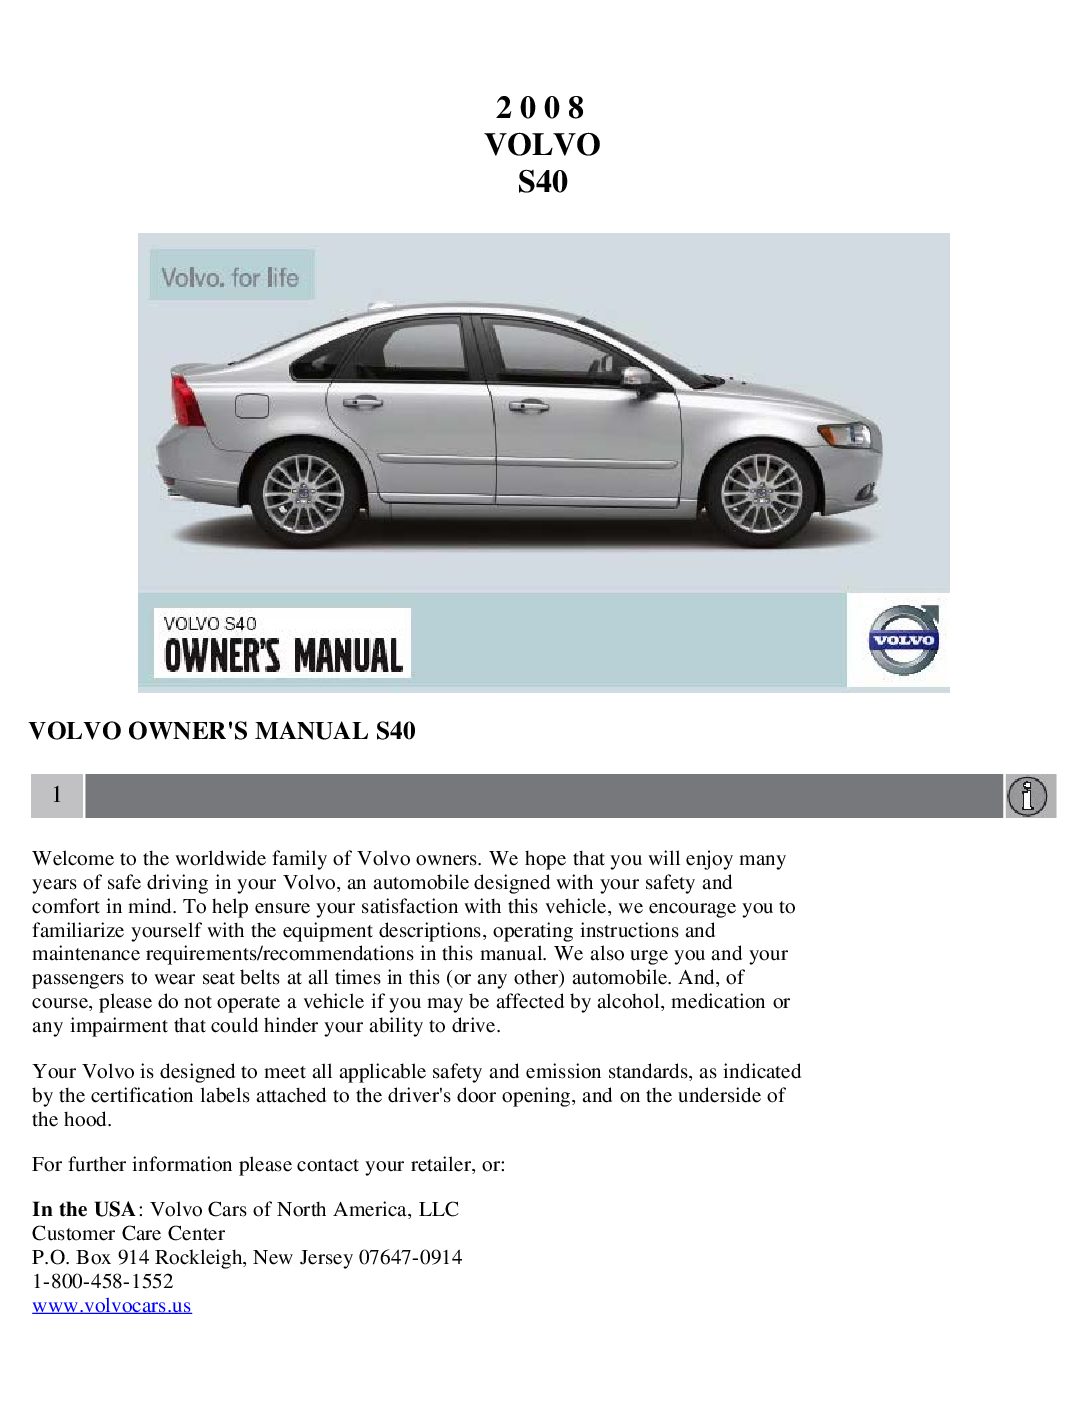 2008 volvo s40 Owners Manual | Just Give Me The Damn Manual